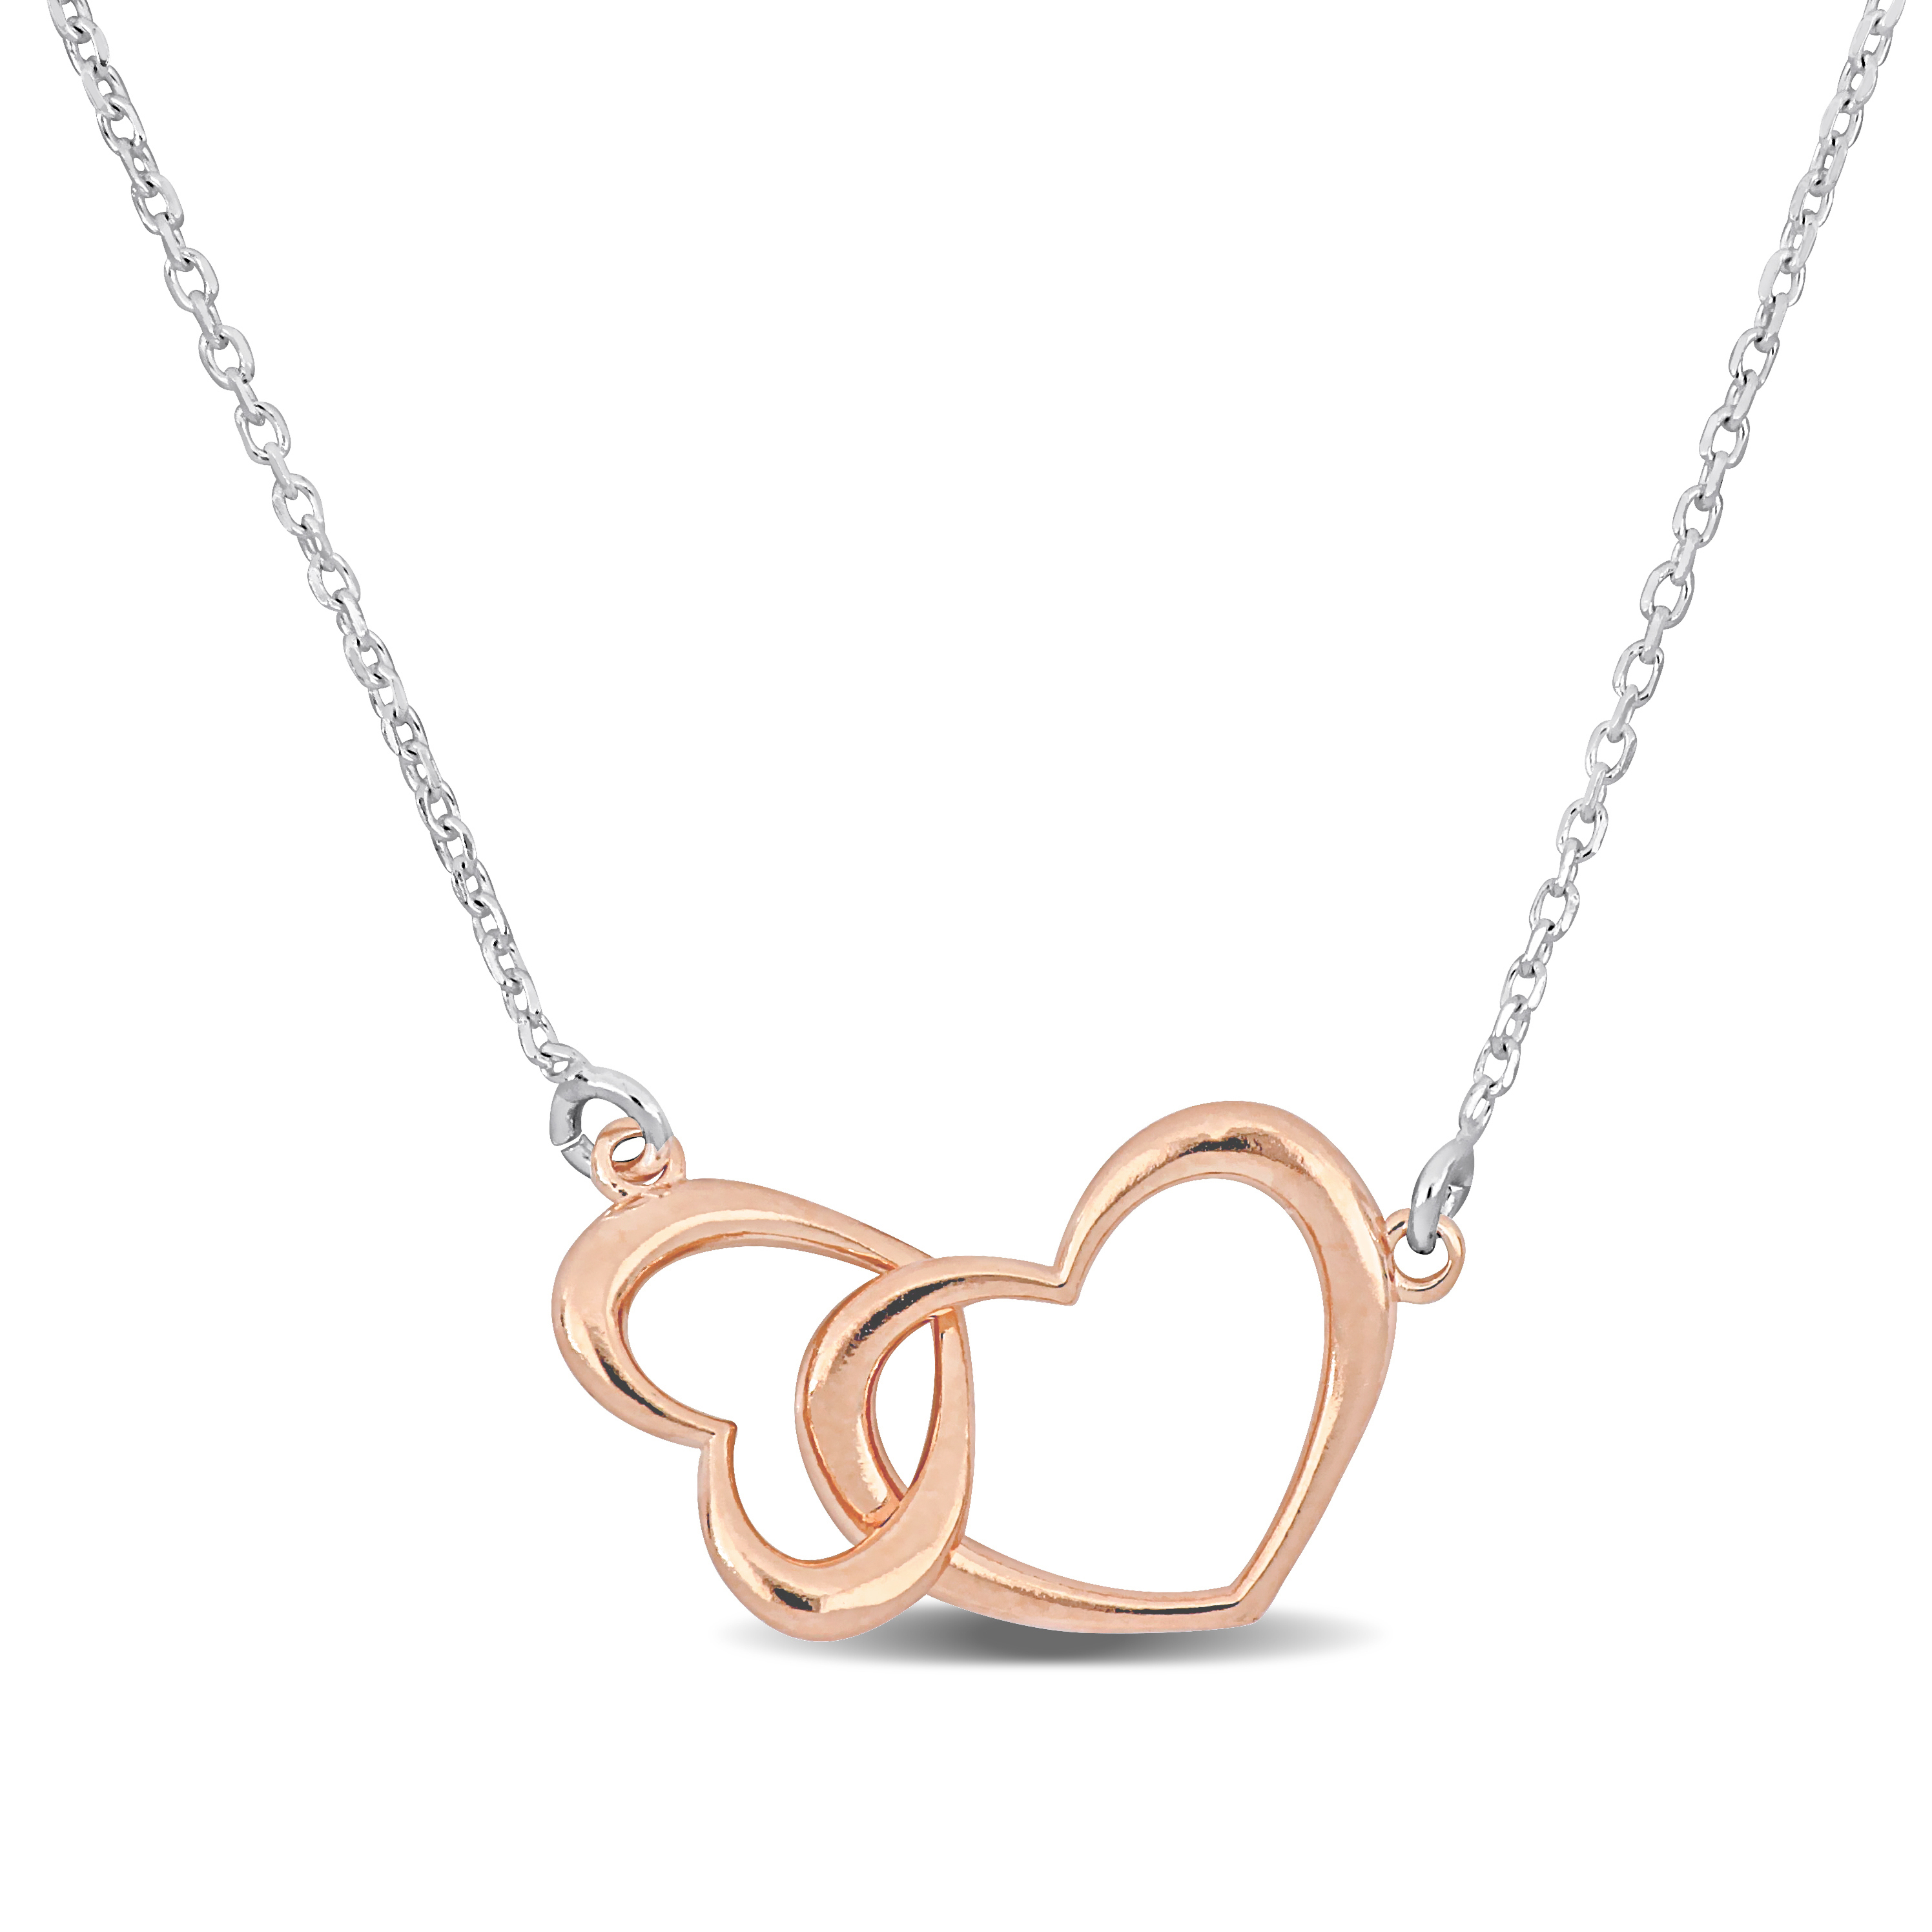 Pink Double Heart Necklace in Sterling Silver - 16.5+1 in.